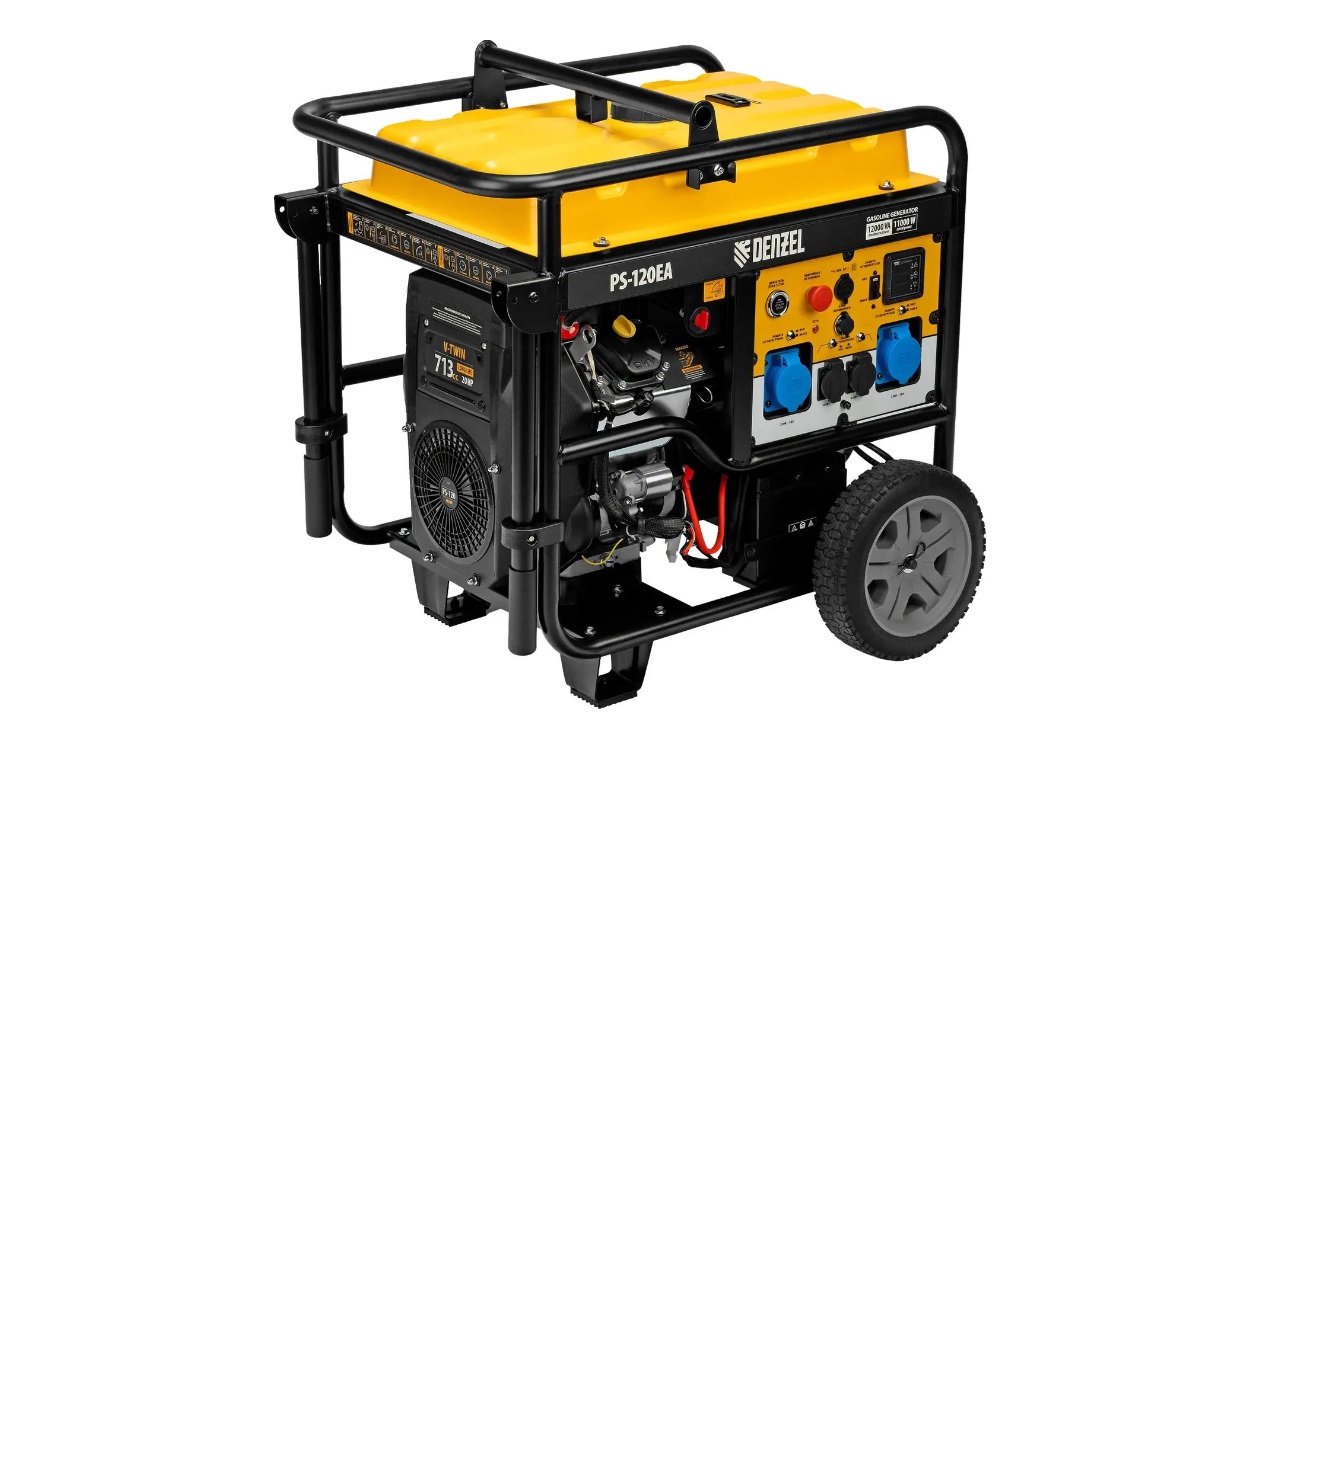 Denzel PS-120EA Single Phase Gasoline Generator with Automatic Start